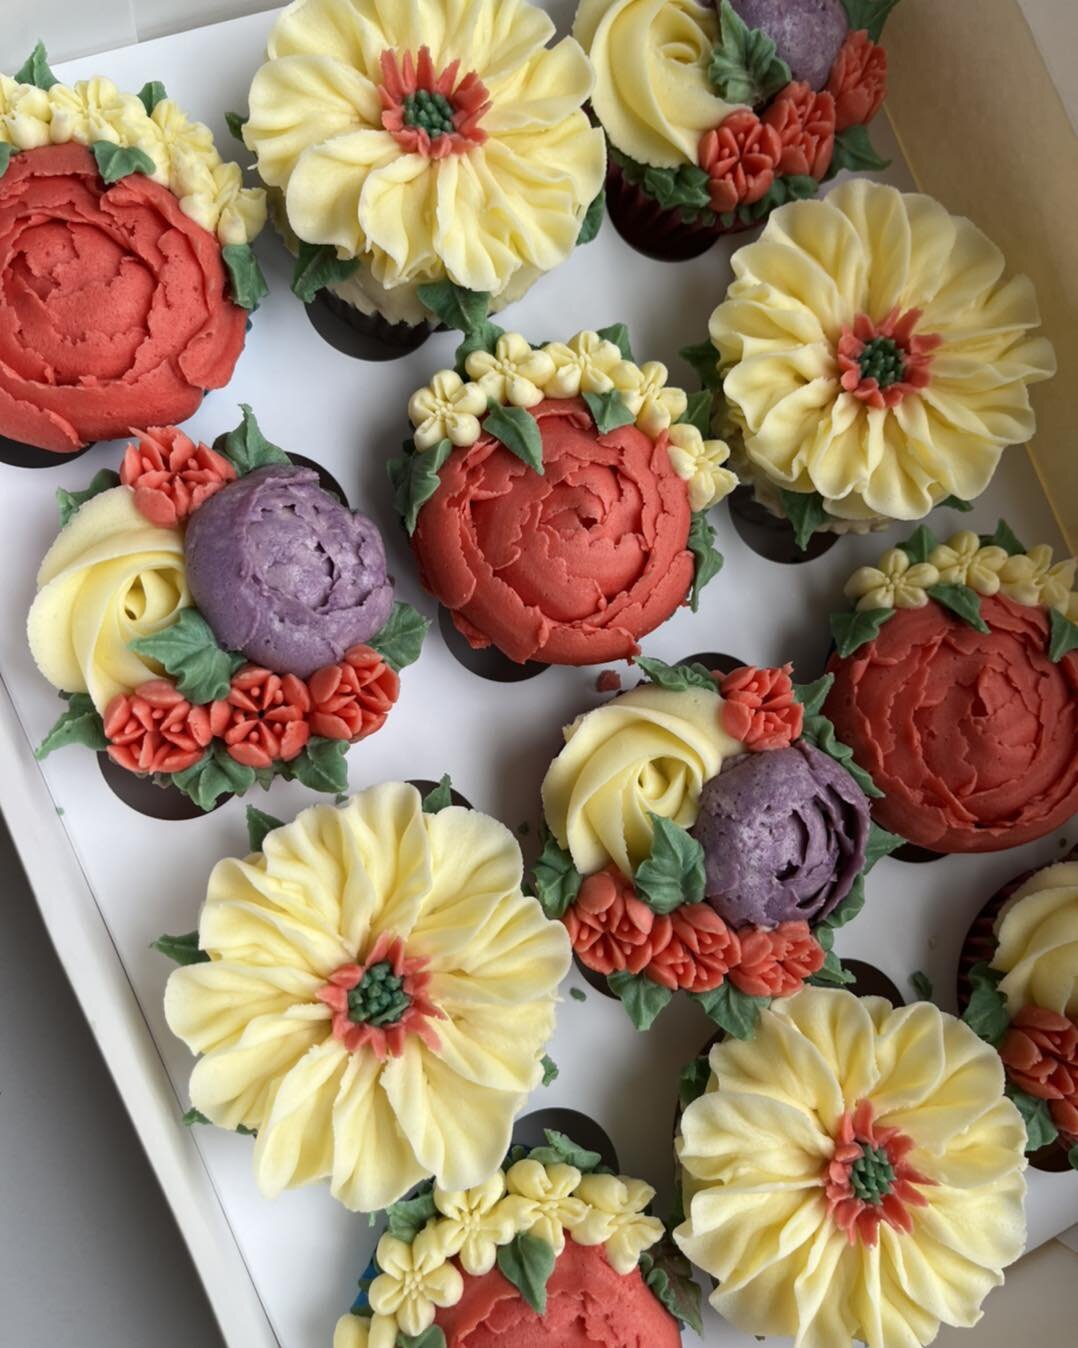 Have you tried our Boxed Blossoms?
Now taking orders https://www.tarasbakedbouquets.ie/small-cupcake-bouquet
#cupcakes #cupcakeflowerbouquets #cupcakeflowerbouquet #floralcupcakebouquet #floralcupcake #cupcakeflower #cupcakeflowers #tarasbakedbouquet